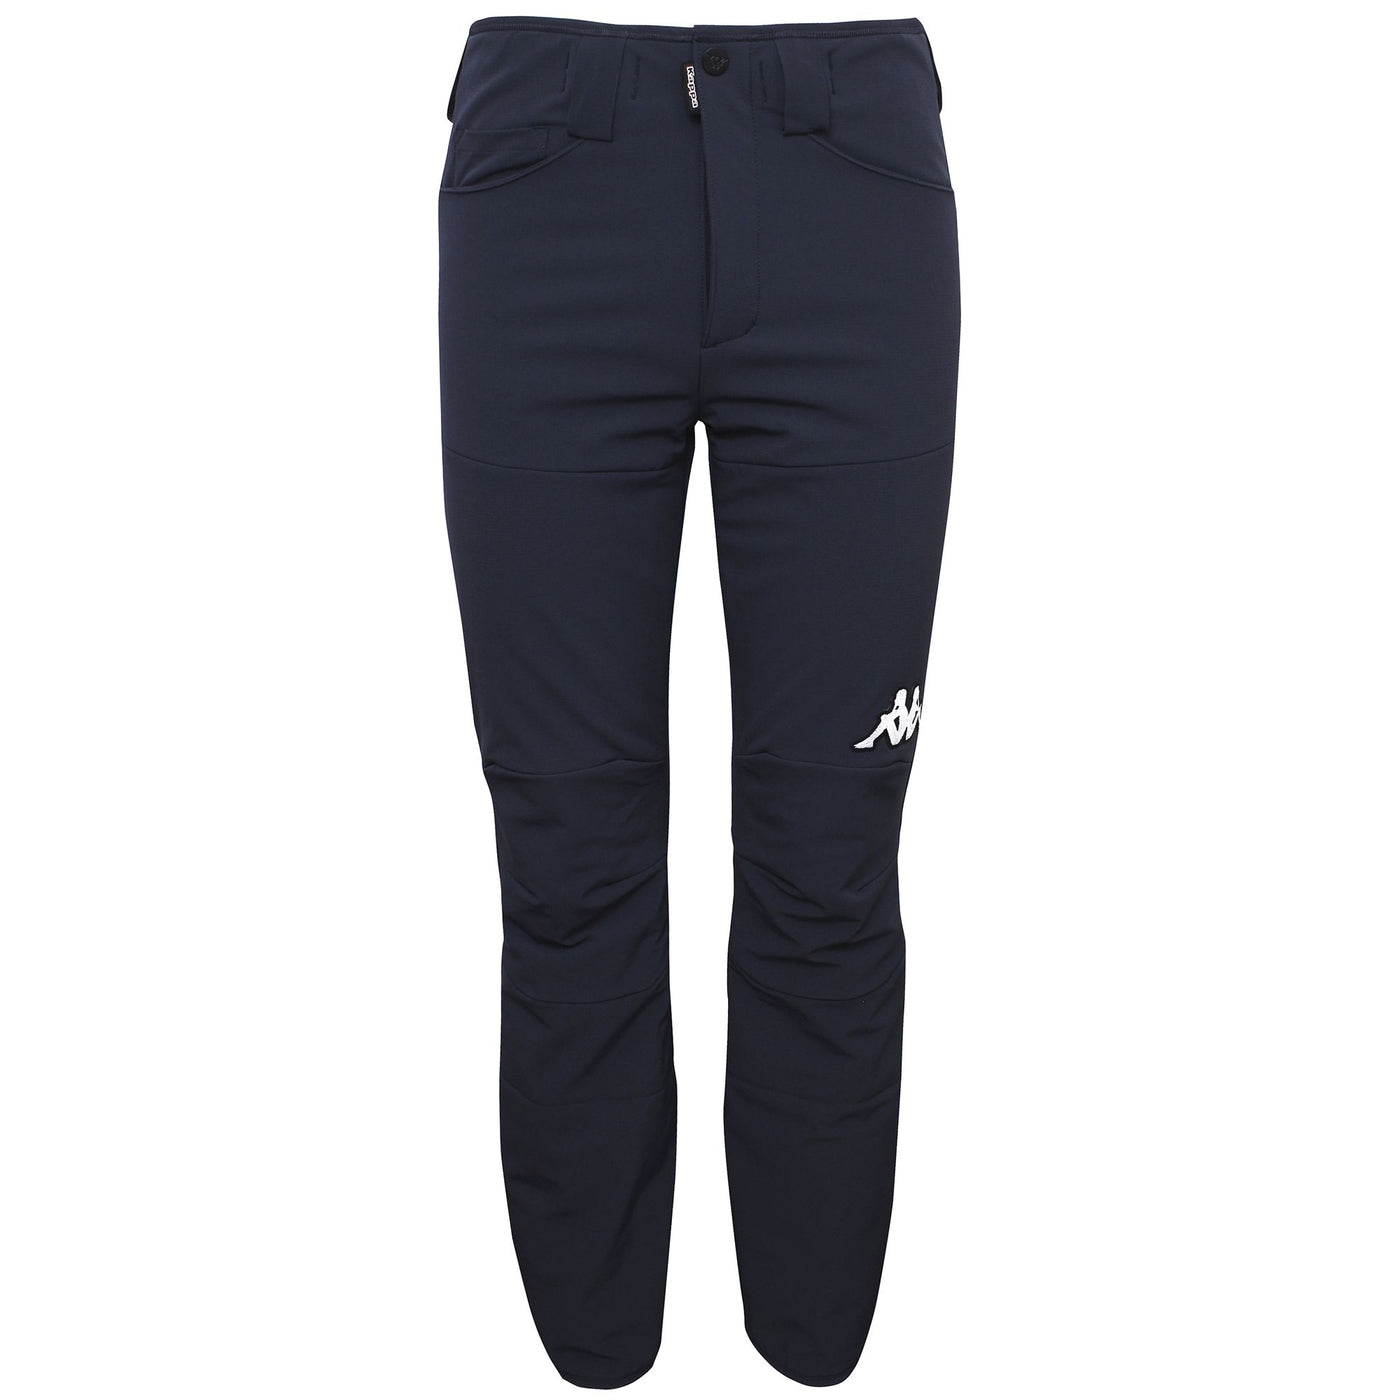 Pants Man 4CENTO 452 COLD BUSTER 3.0 Sport Trousers BLUE NIGHT Photo (jpg Rgb)			